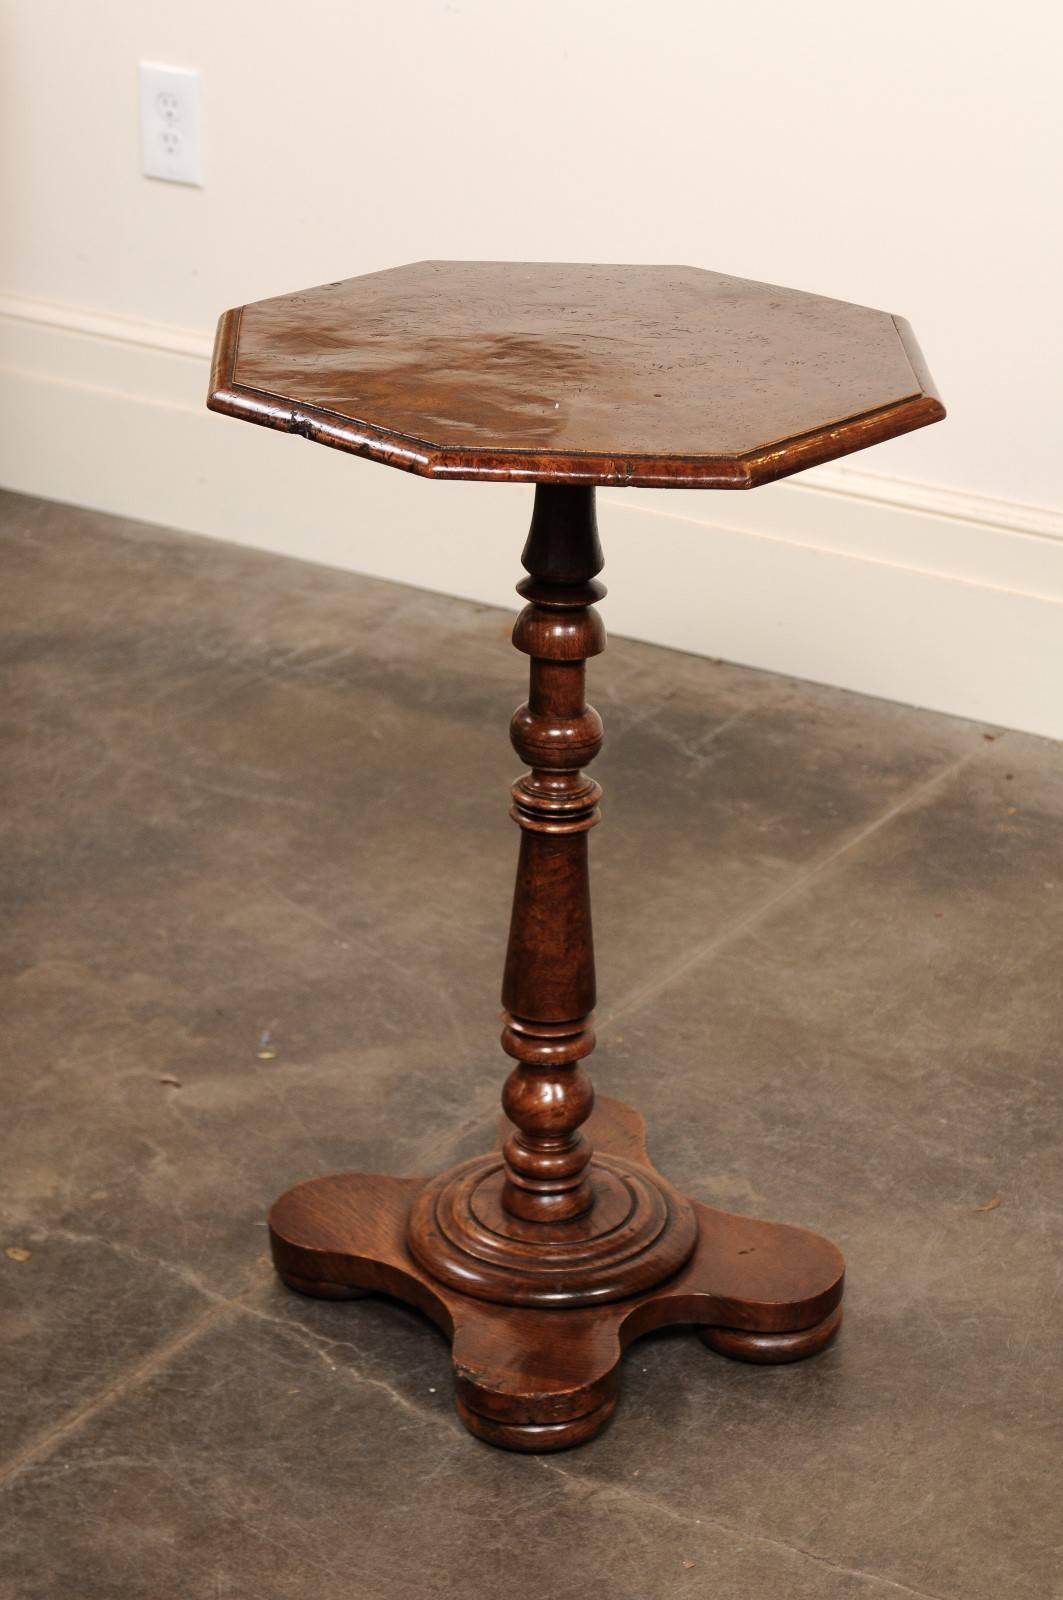 Wood English Burl Elm Side Table with Octagonal Top over Quatrefoil Base, circa 1870